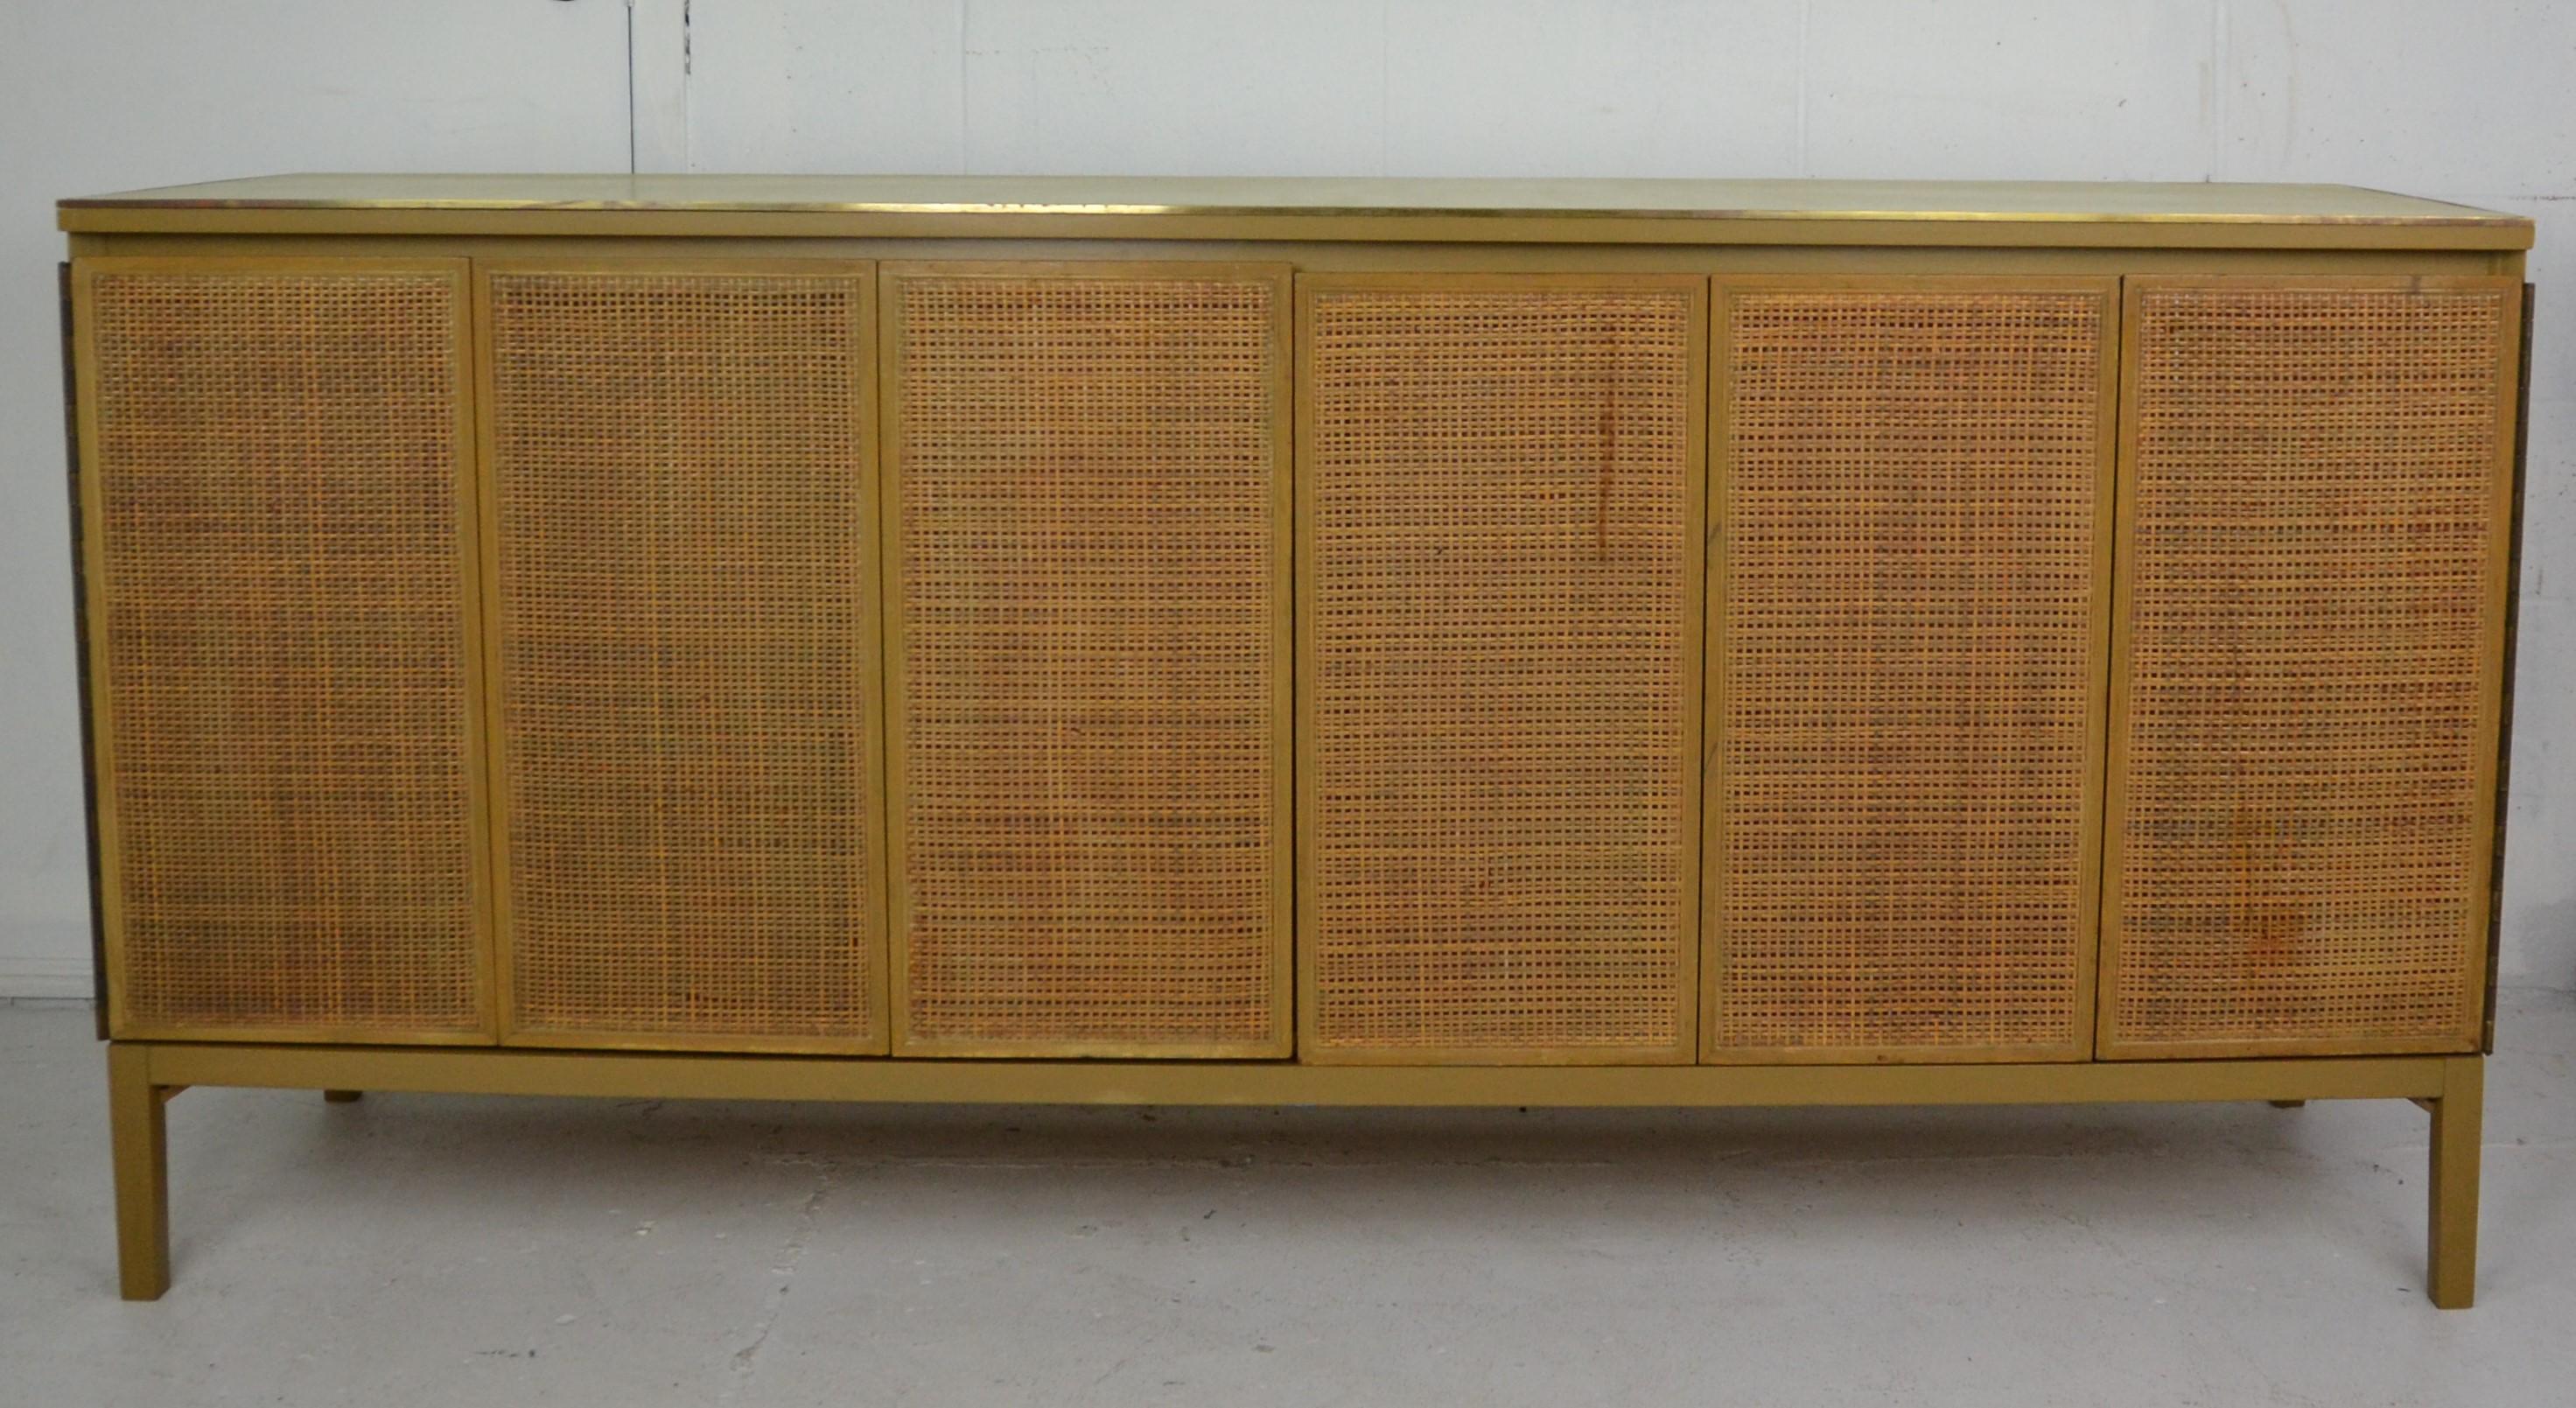 Dresser or credenza by Paul McCobb with original leather top, brass edge, cane front panels, and 8 drawers.